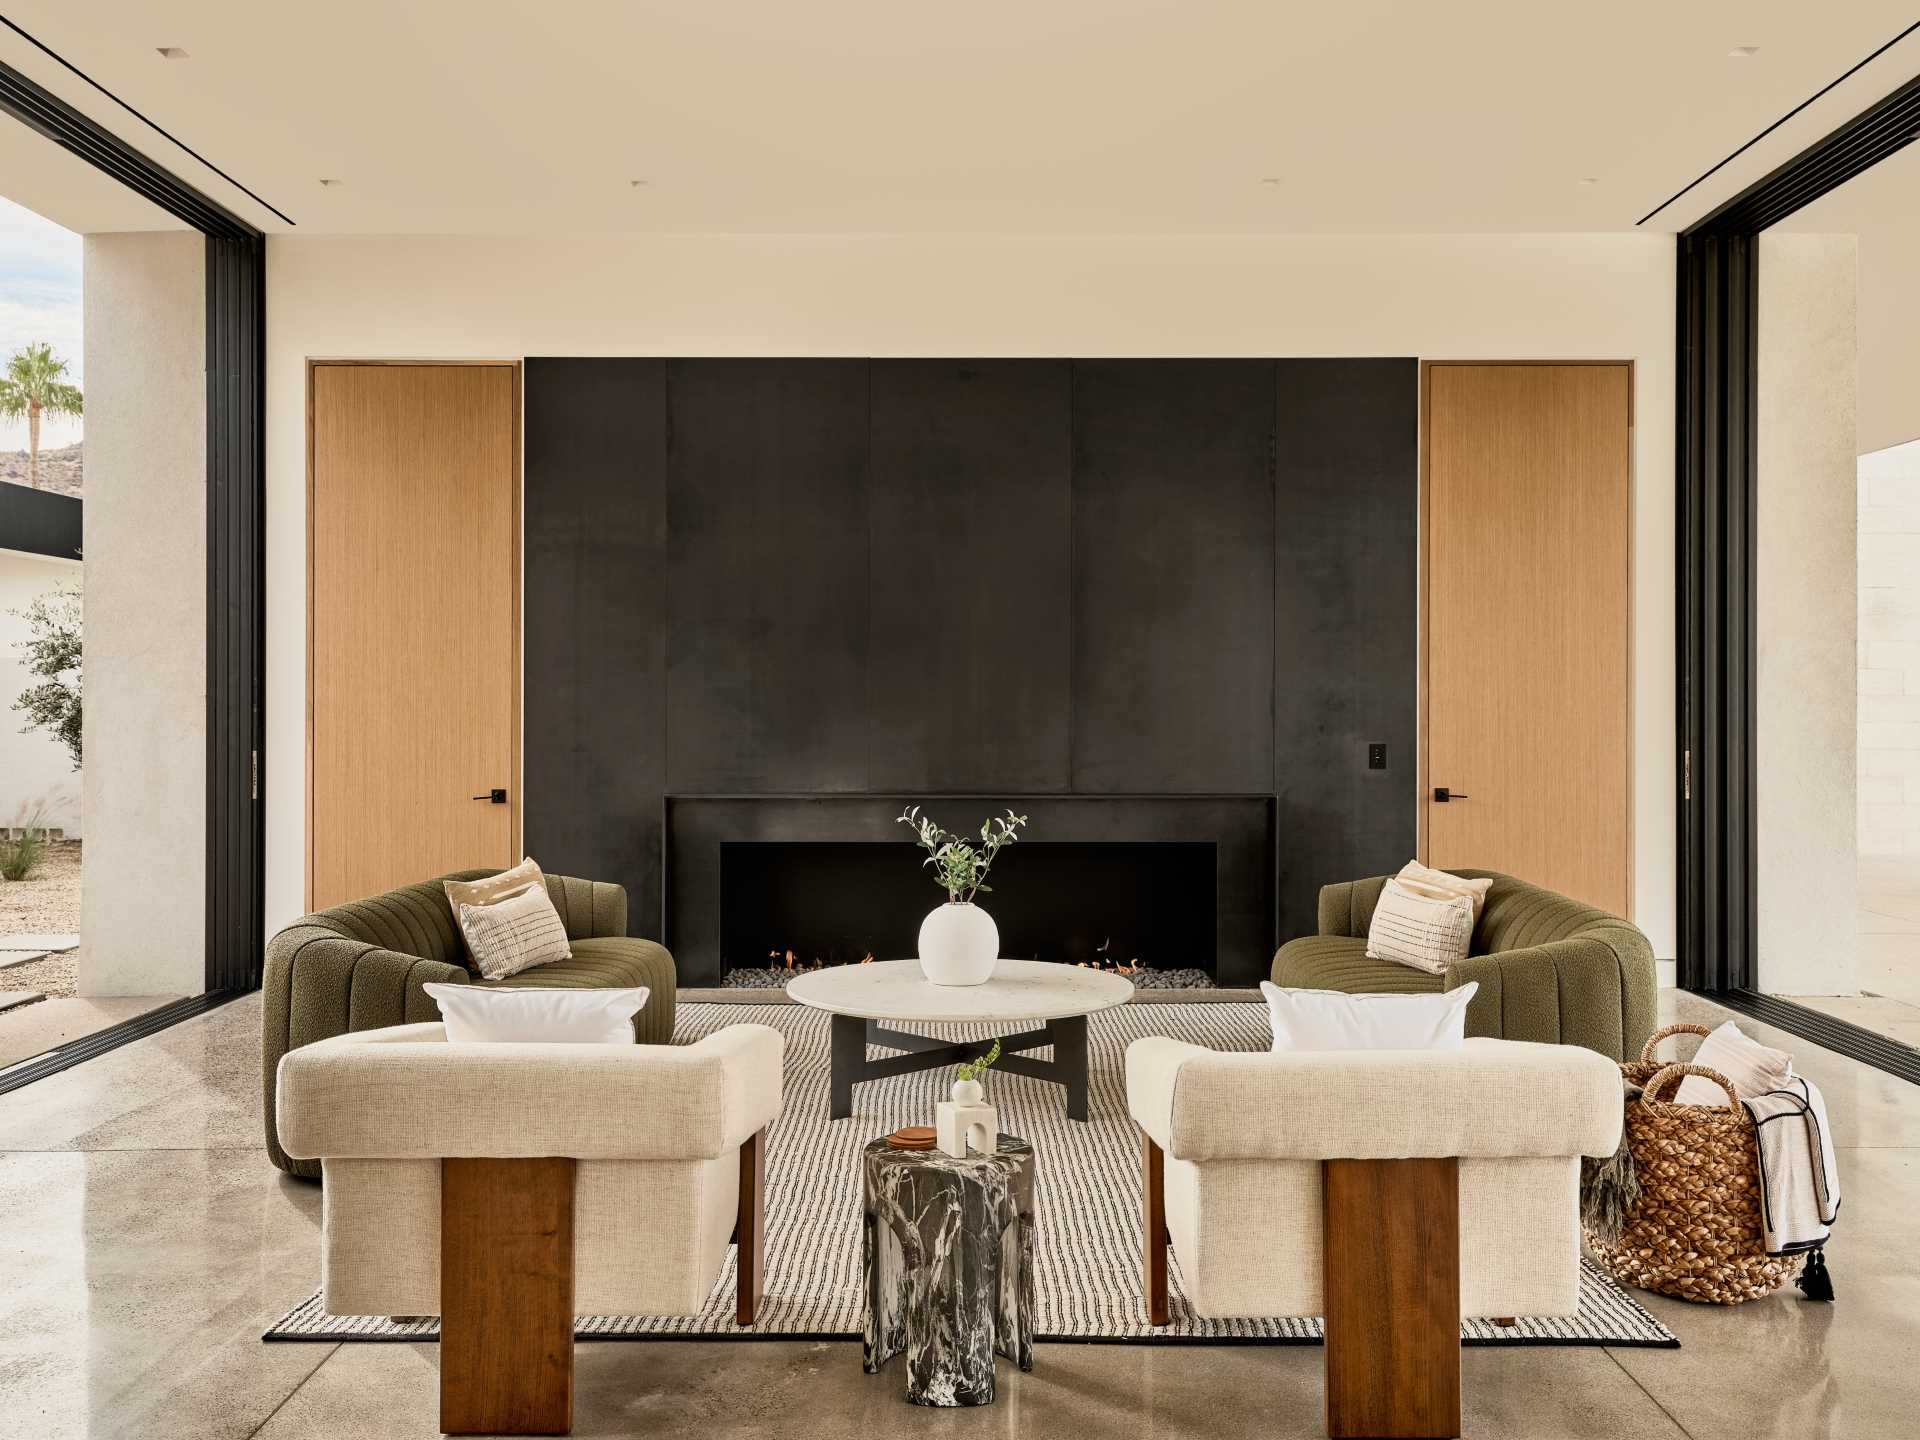 A large, steel-clad fireplace anc،rs the living room in this great room.